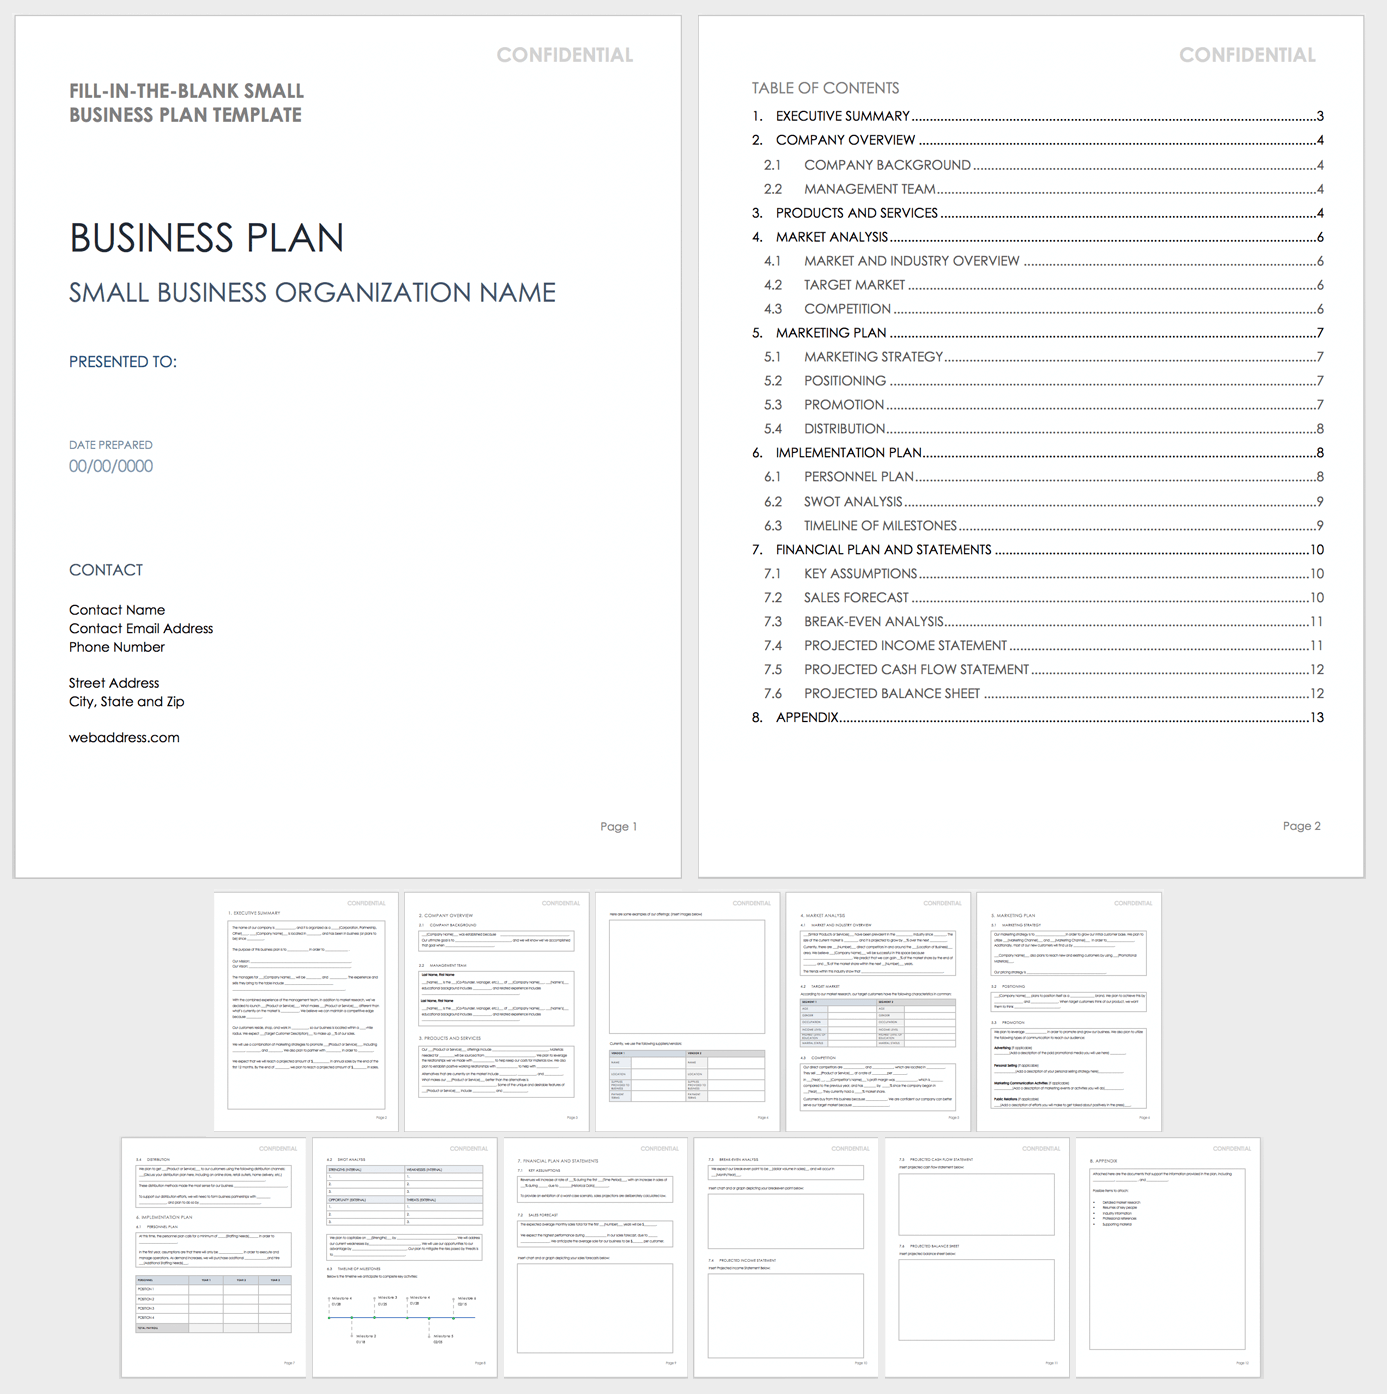 Fill-in-the-Blank Small Business Plan Template